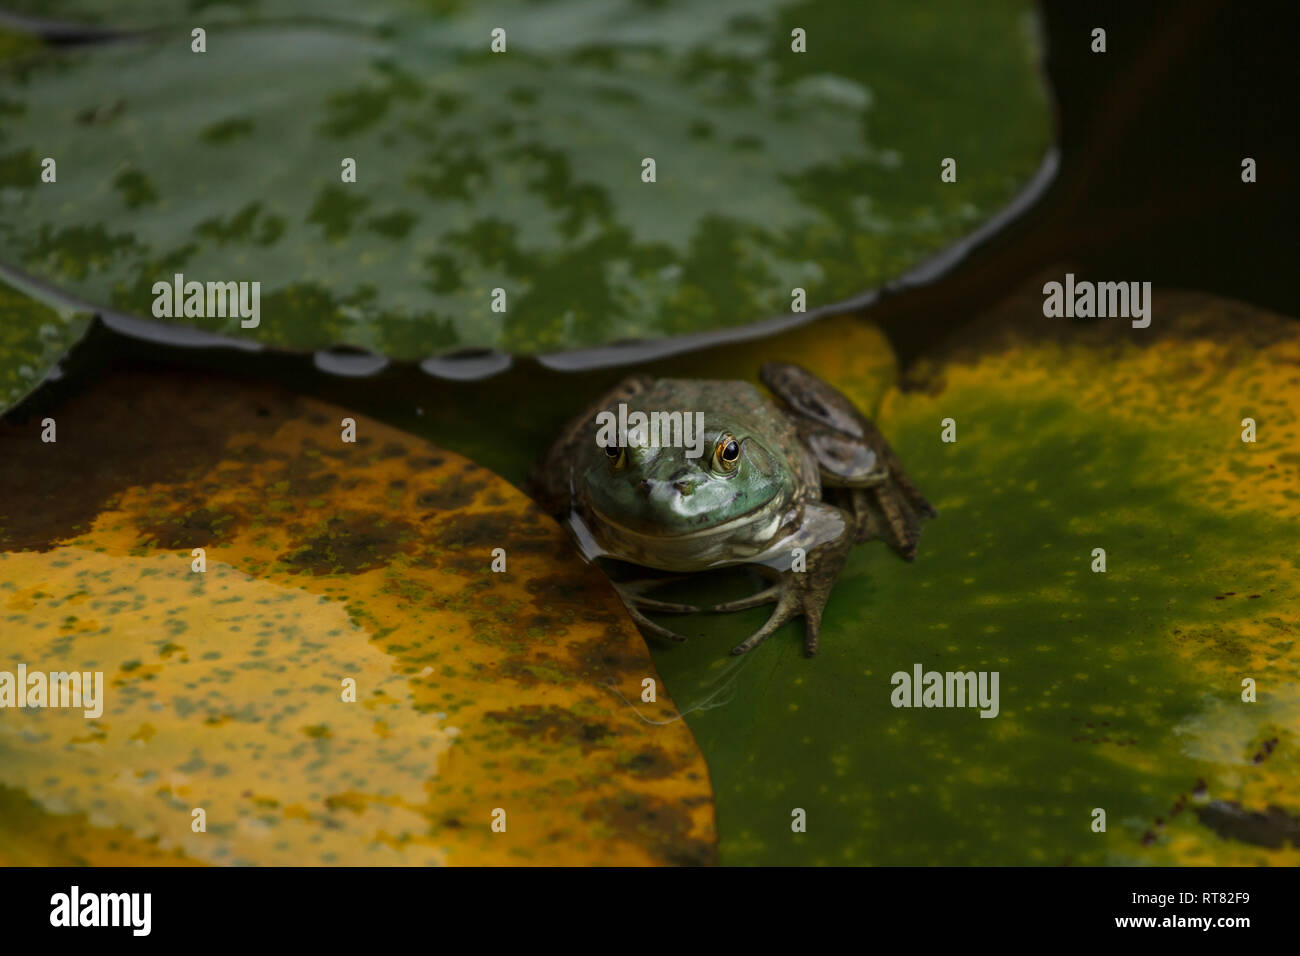 Cute little frog resting on lily leaves in a pond Stock Photo